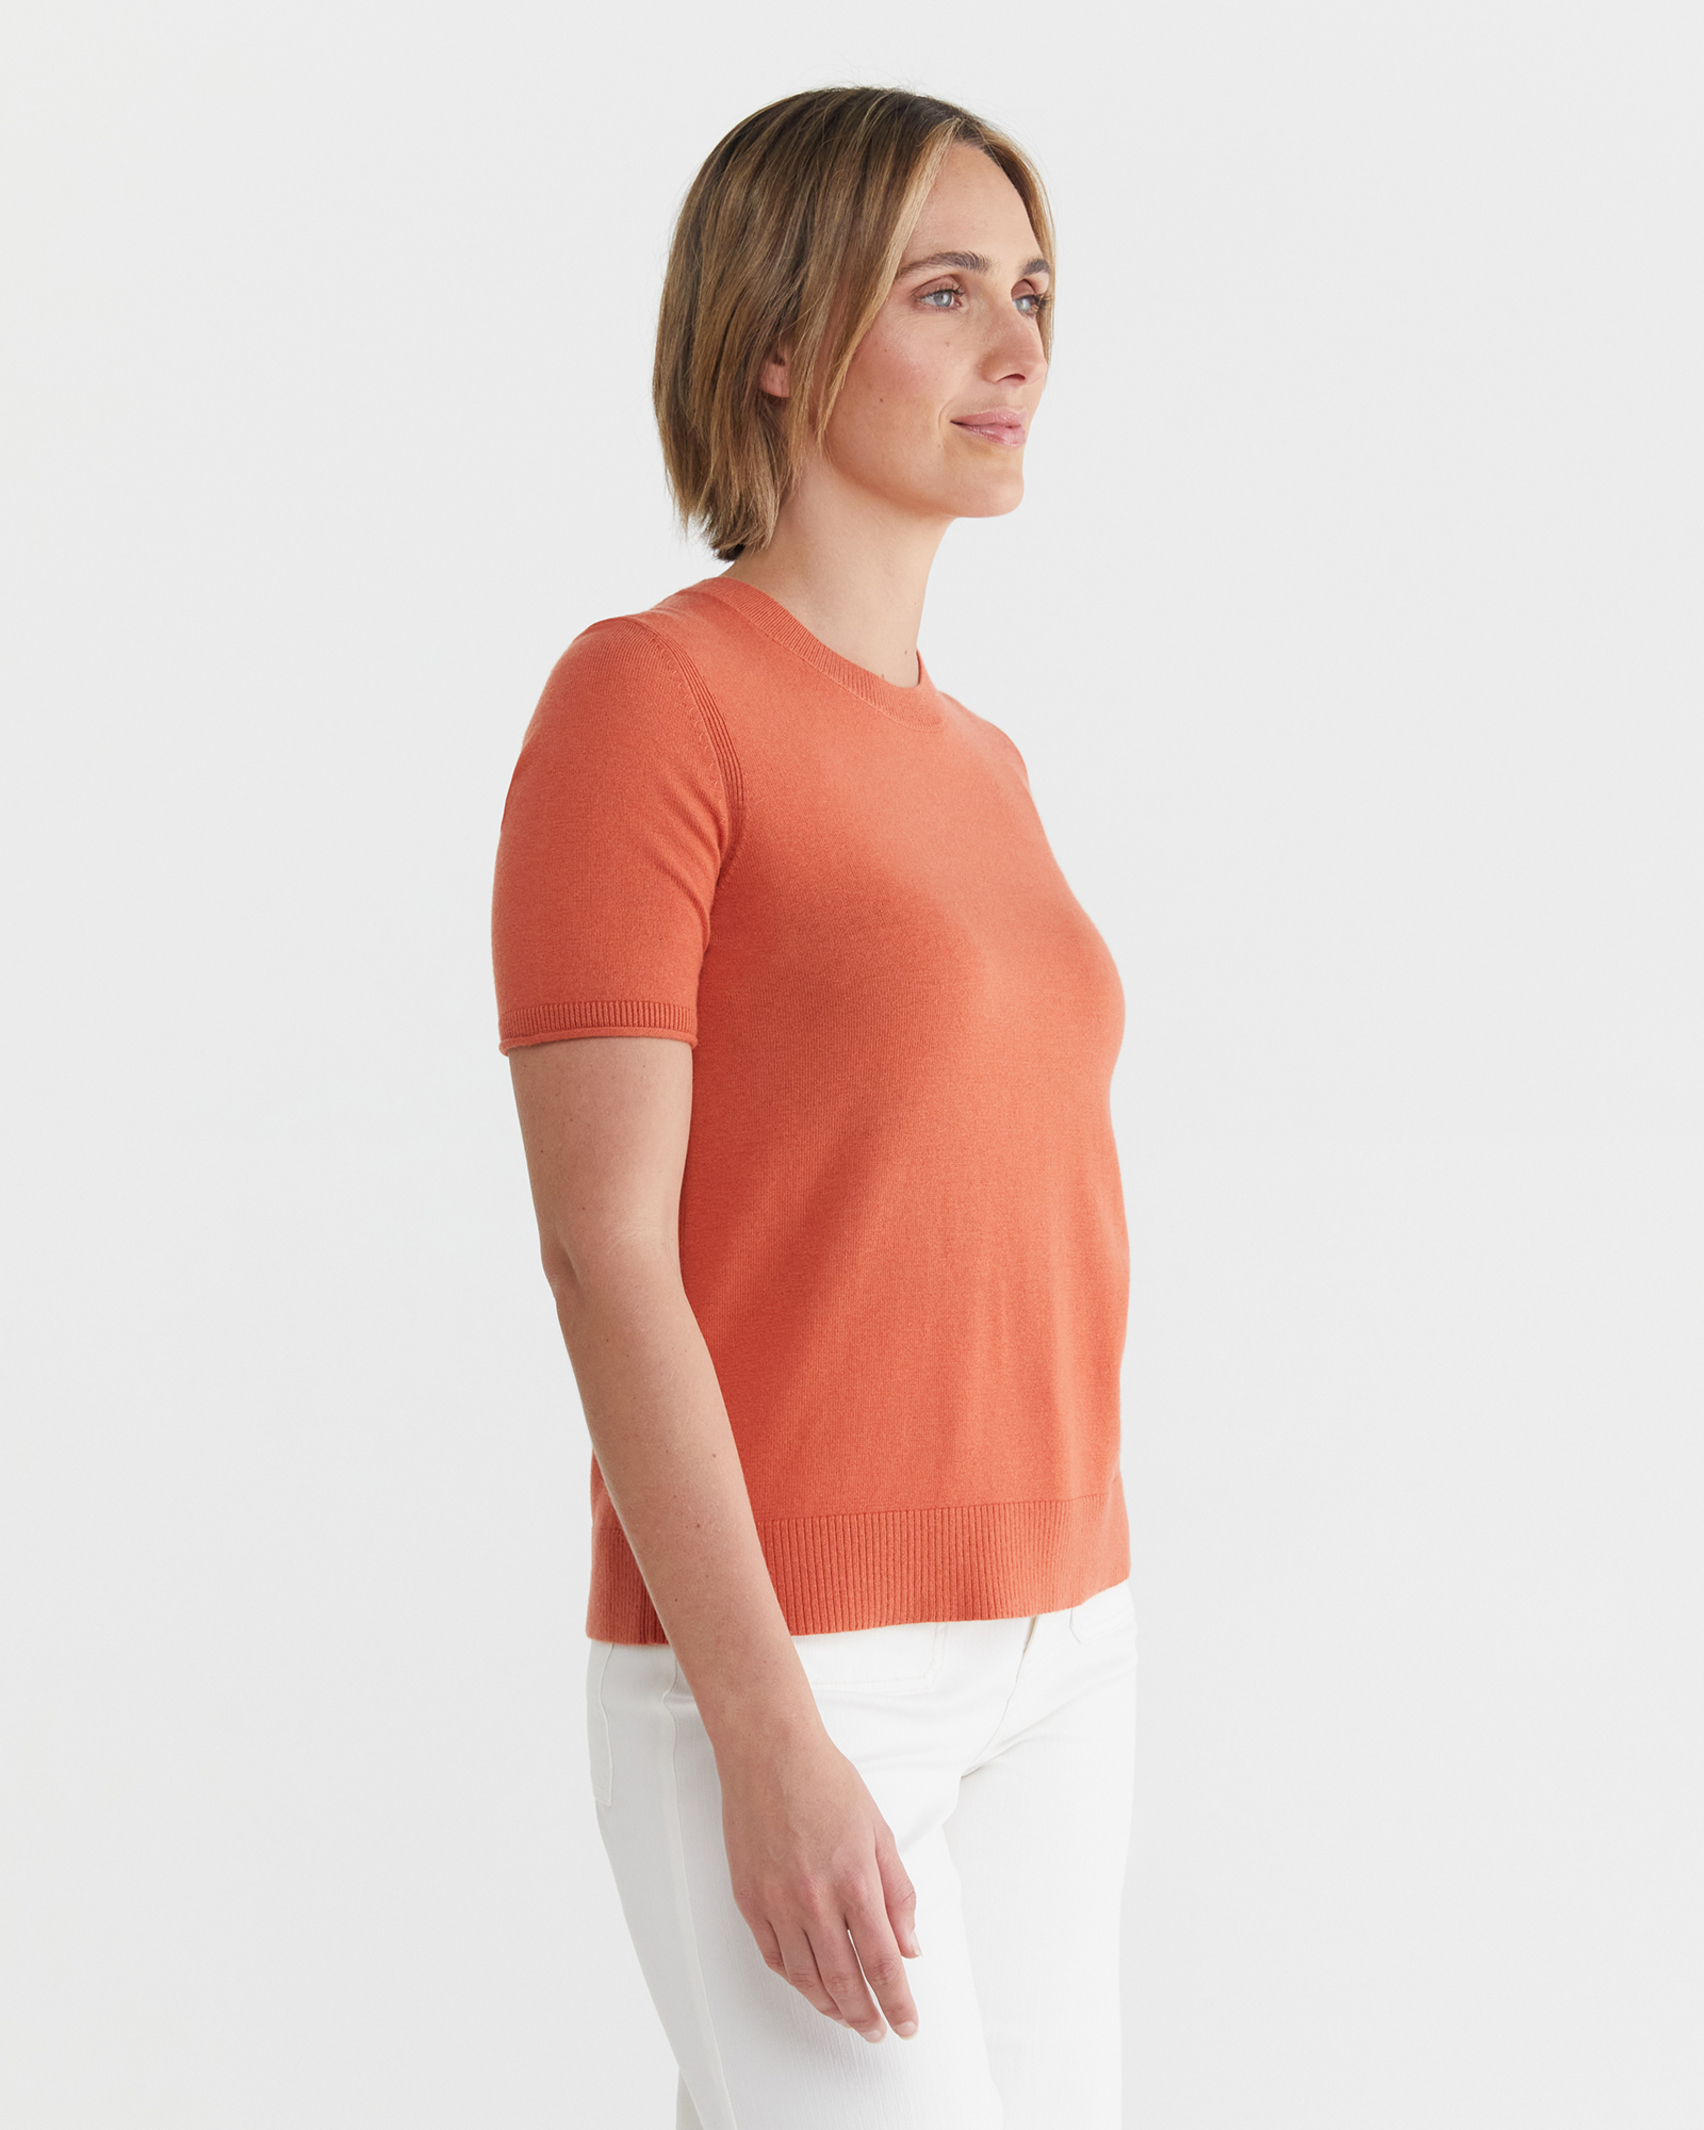 Laurina Knit Tee in TERRACOTTA